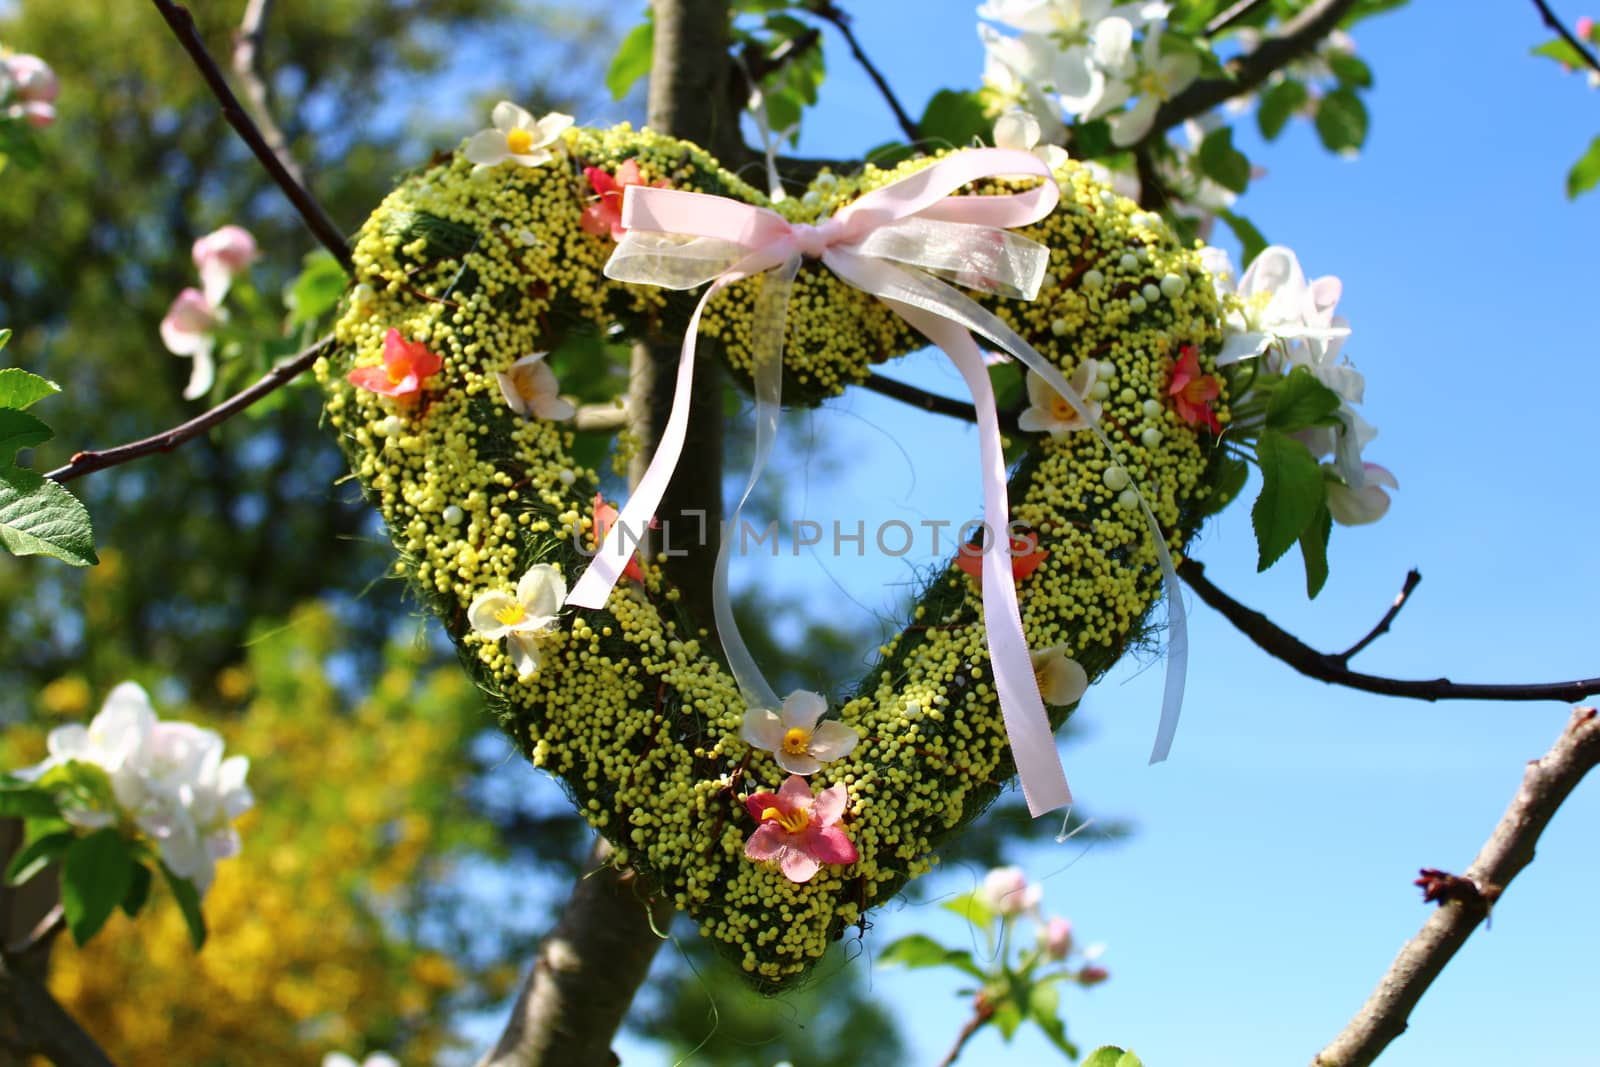 The picture shows a heart in the blossoming apple tree.